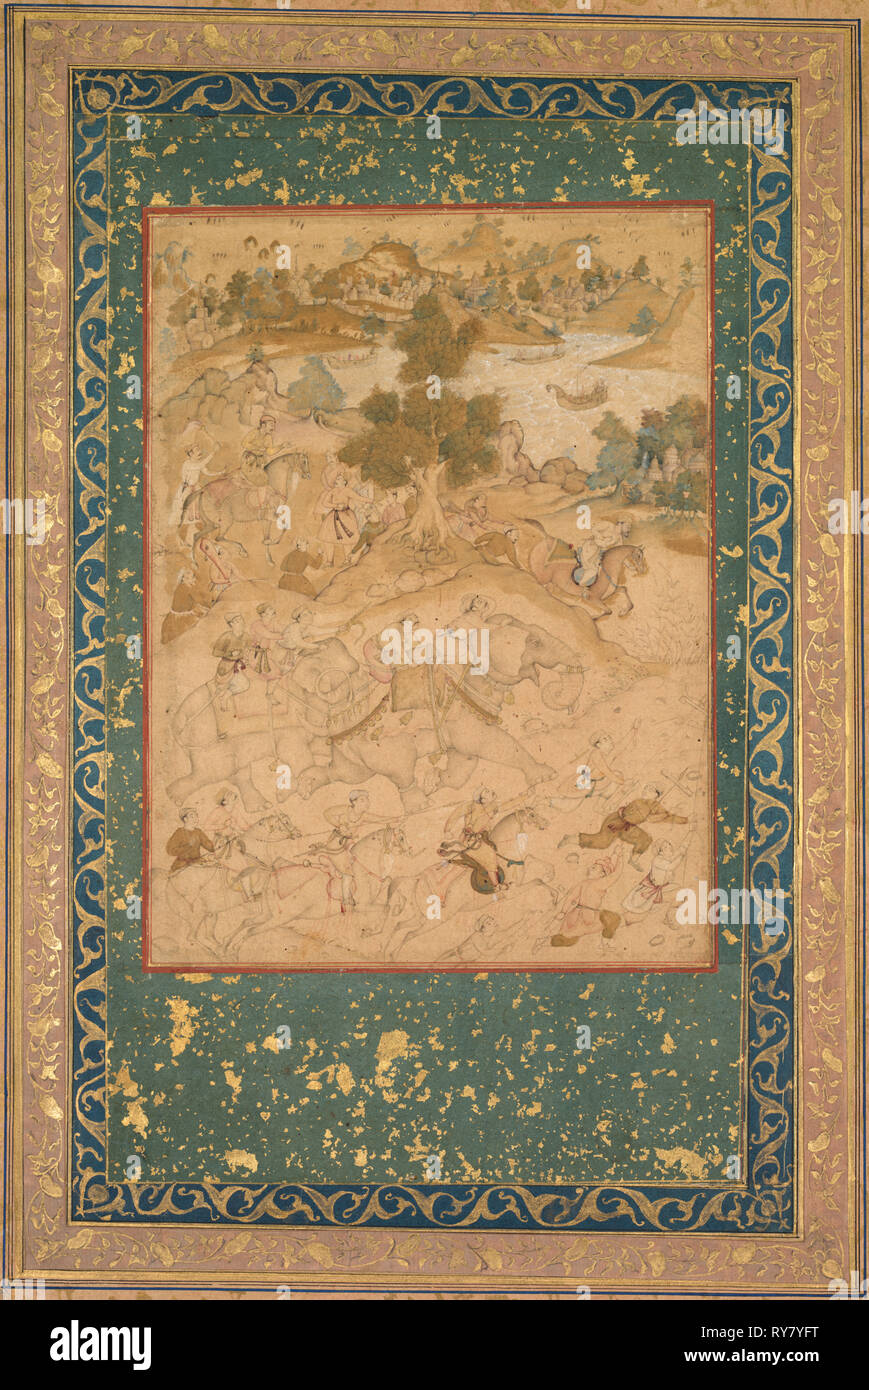 Akbar supervising the capture of wild elephants at Malwa in 1564, painting 90 from an Akbar-nama (Book of Akbar) of Abu’l Fazl (Indian 1551–1602), c. 1602–3; borders added c. 1700s. Attributed to Farukh Chela (Indian), or Govardhan (Indian, active c.1596-1645), or Dhanraj (Indian). Ink with use of colors and gold on paper, mounted on an album page with borders of gold-decorated buff and blue paper (recto); calligraphy by Faqir Ali (verso); page: 37.5 x 25.4 cm (14 3/4 x 10 in Stock Photo